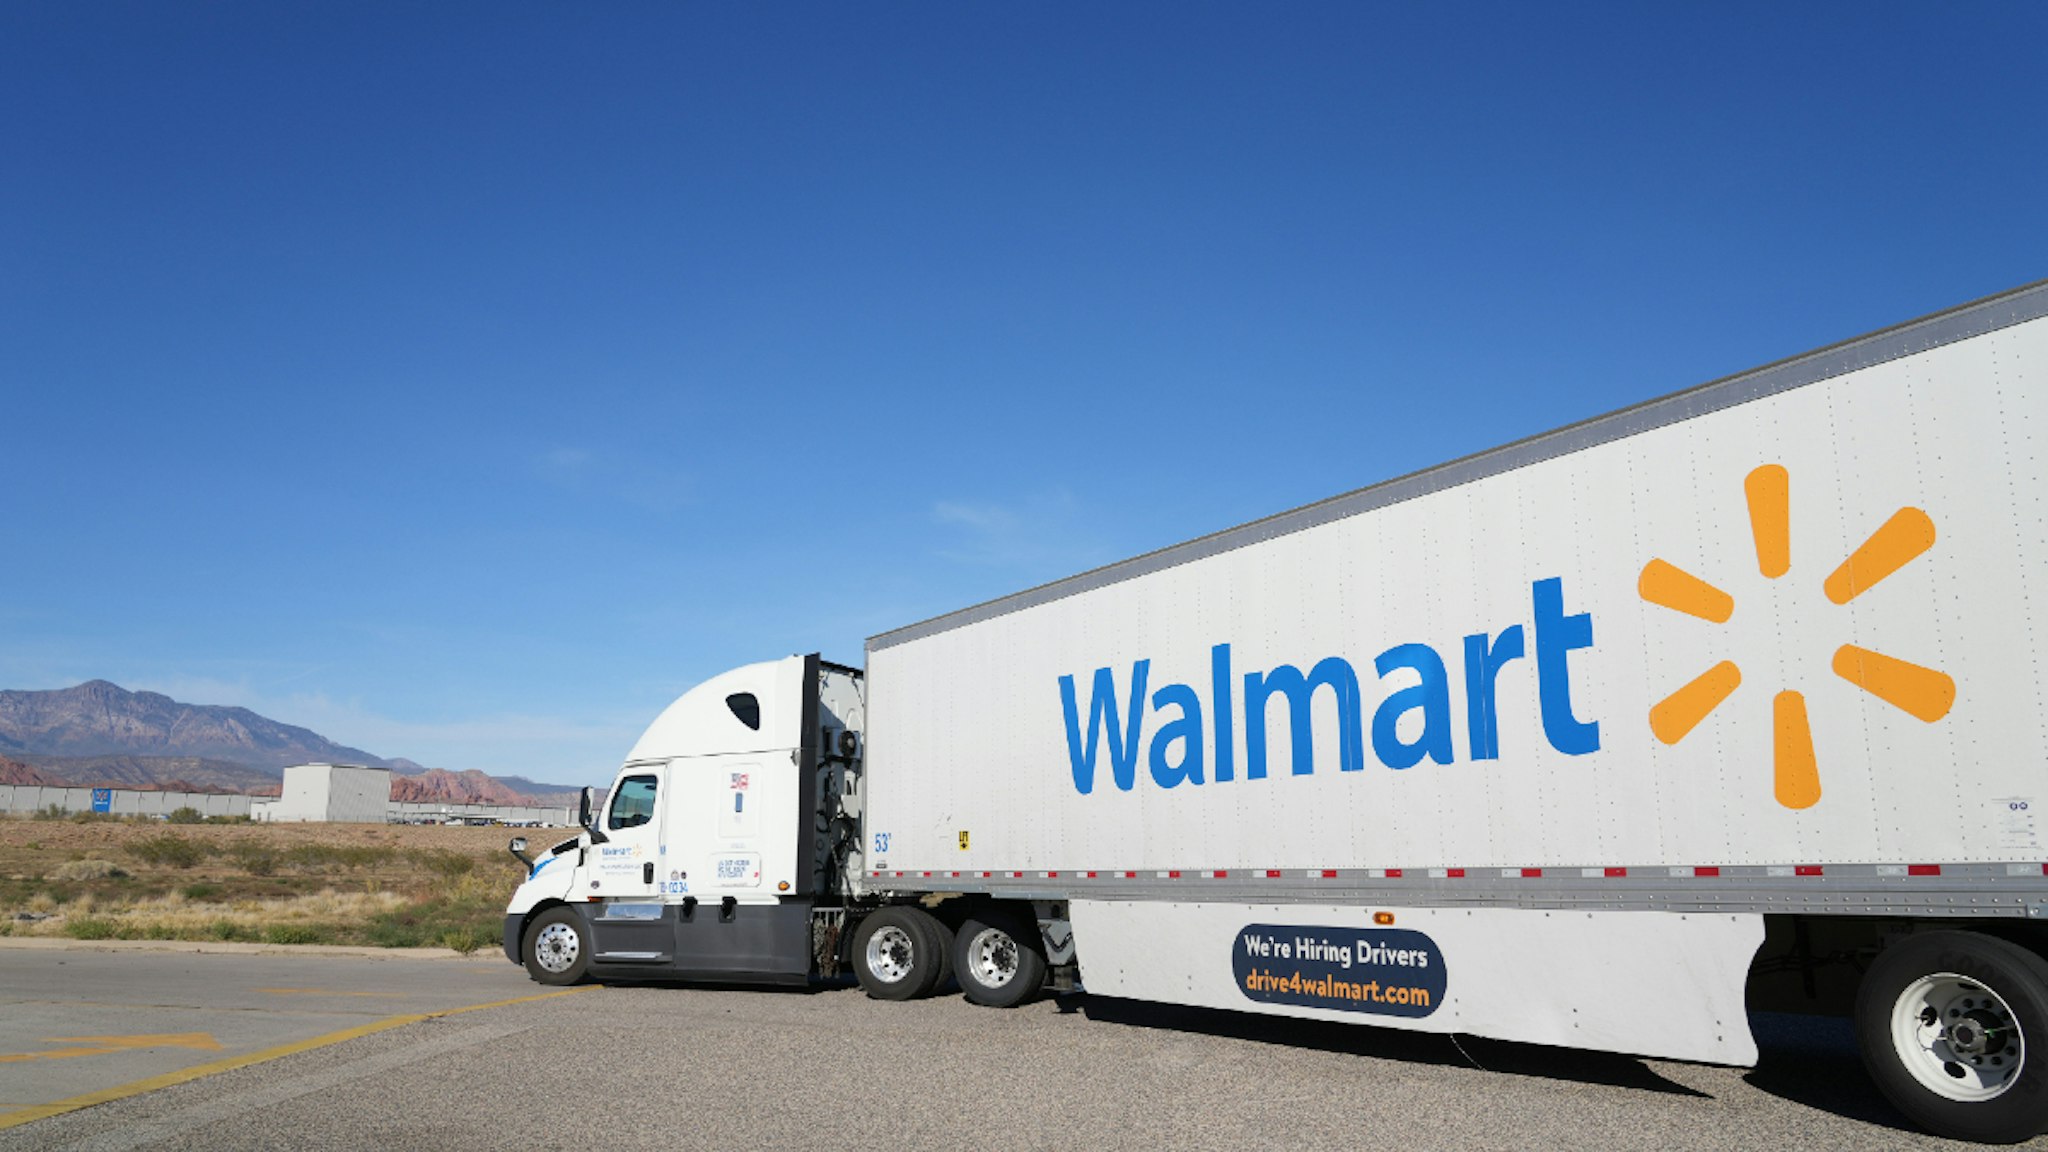 A truck enters a Walmart Distribution Center in Saint George, Utah, U.S., on Sunday, Nov. 14, 2021. Walmart Inc. is scheduled to release earnings figures on November 15.